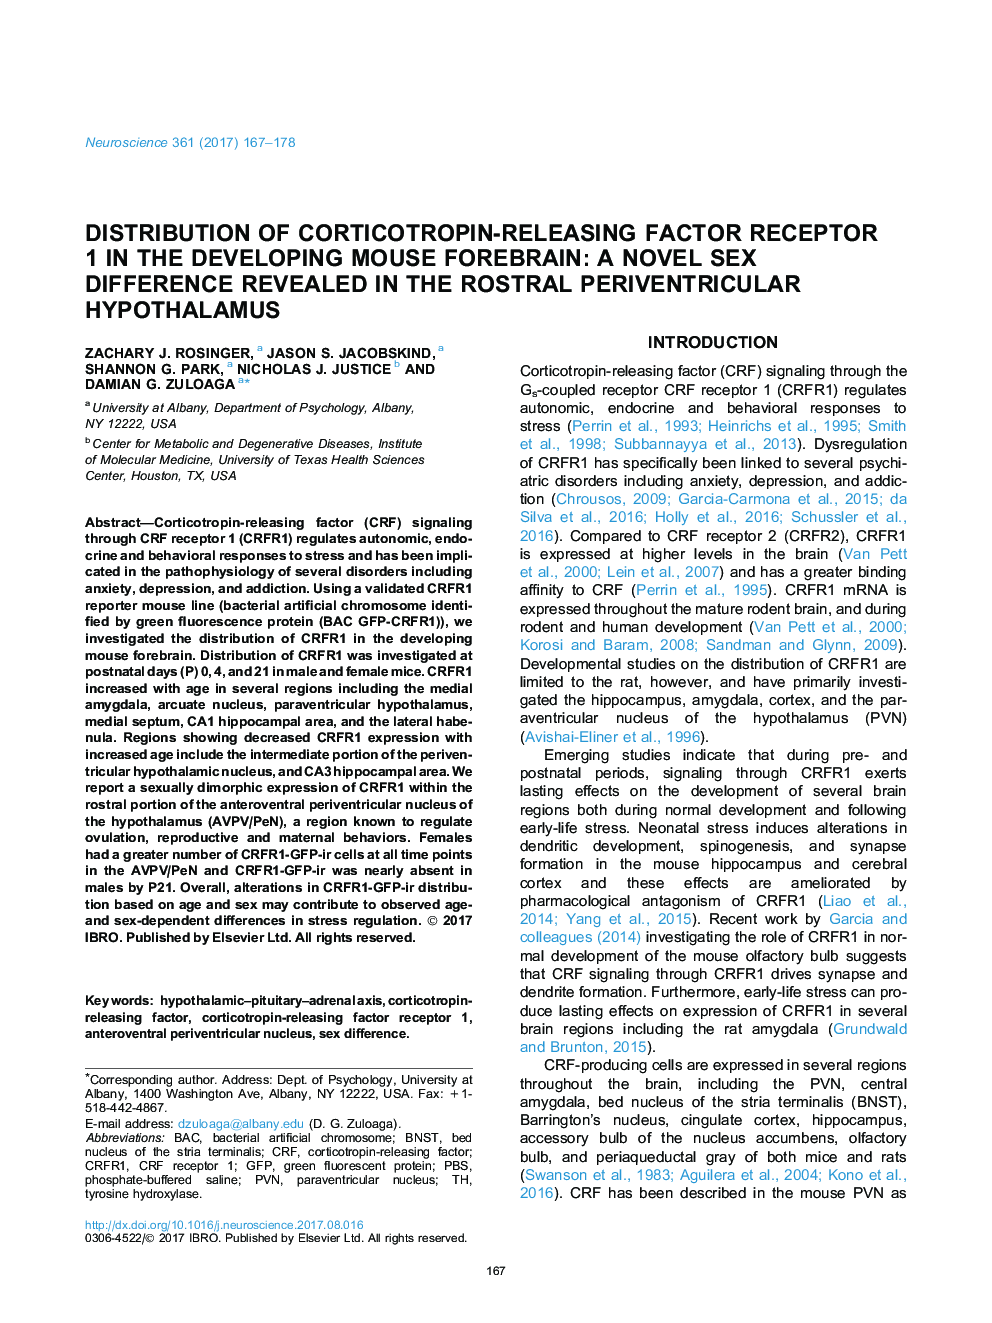 Distribution of corticotropin-releasing factor receptor 1 in the developing mouse forebrain: A novel sex difference revealed in the rostral periventricular hypothalamus